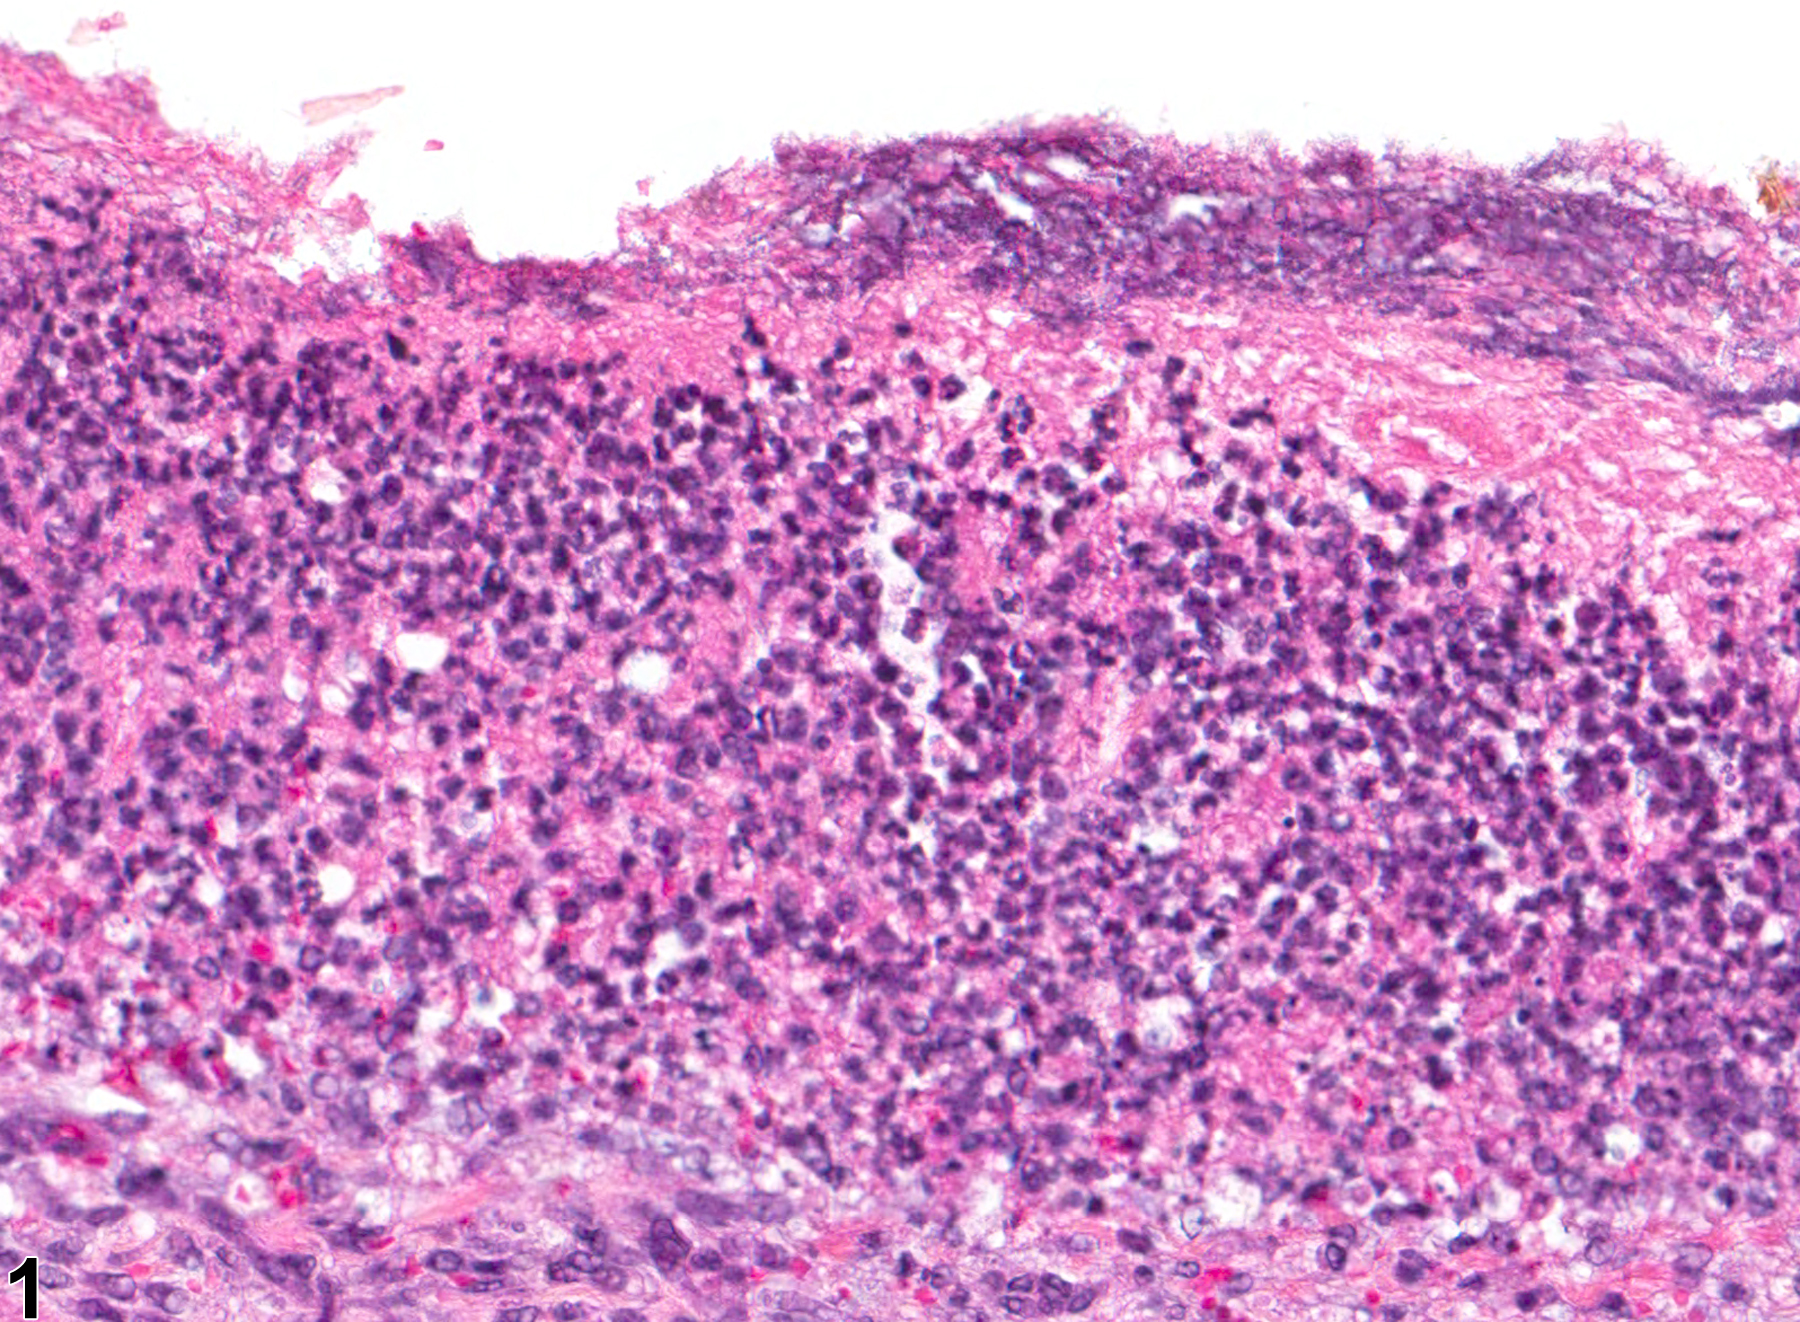 Image of inflammation in the forestomach from a male F344/N rat in a chronic study